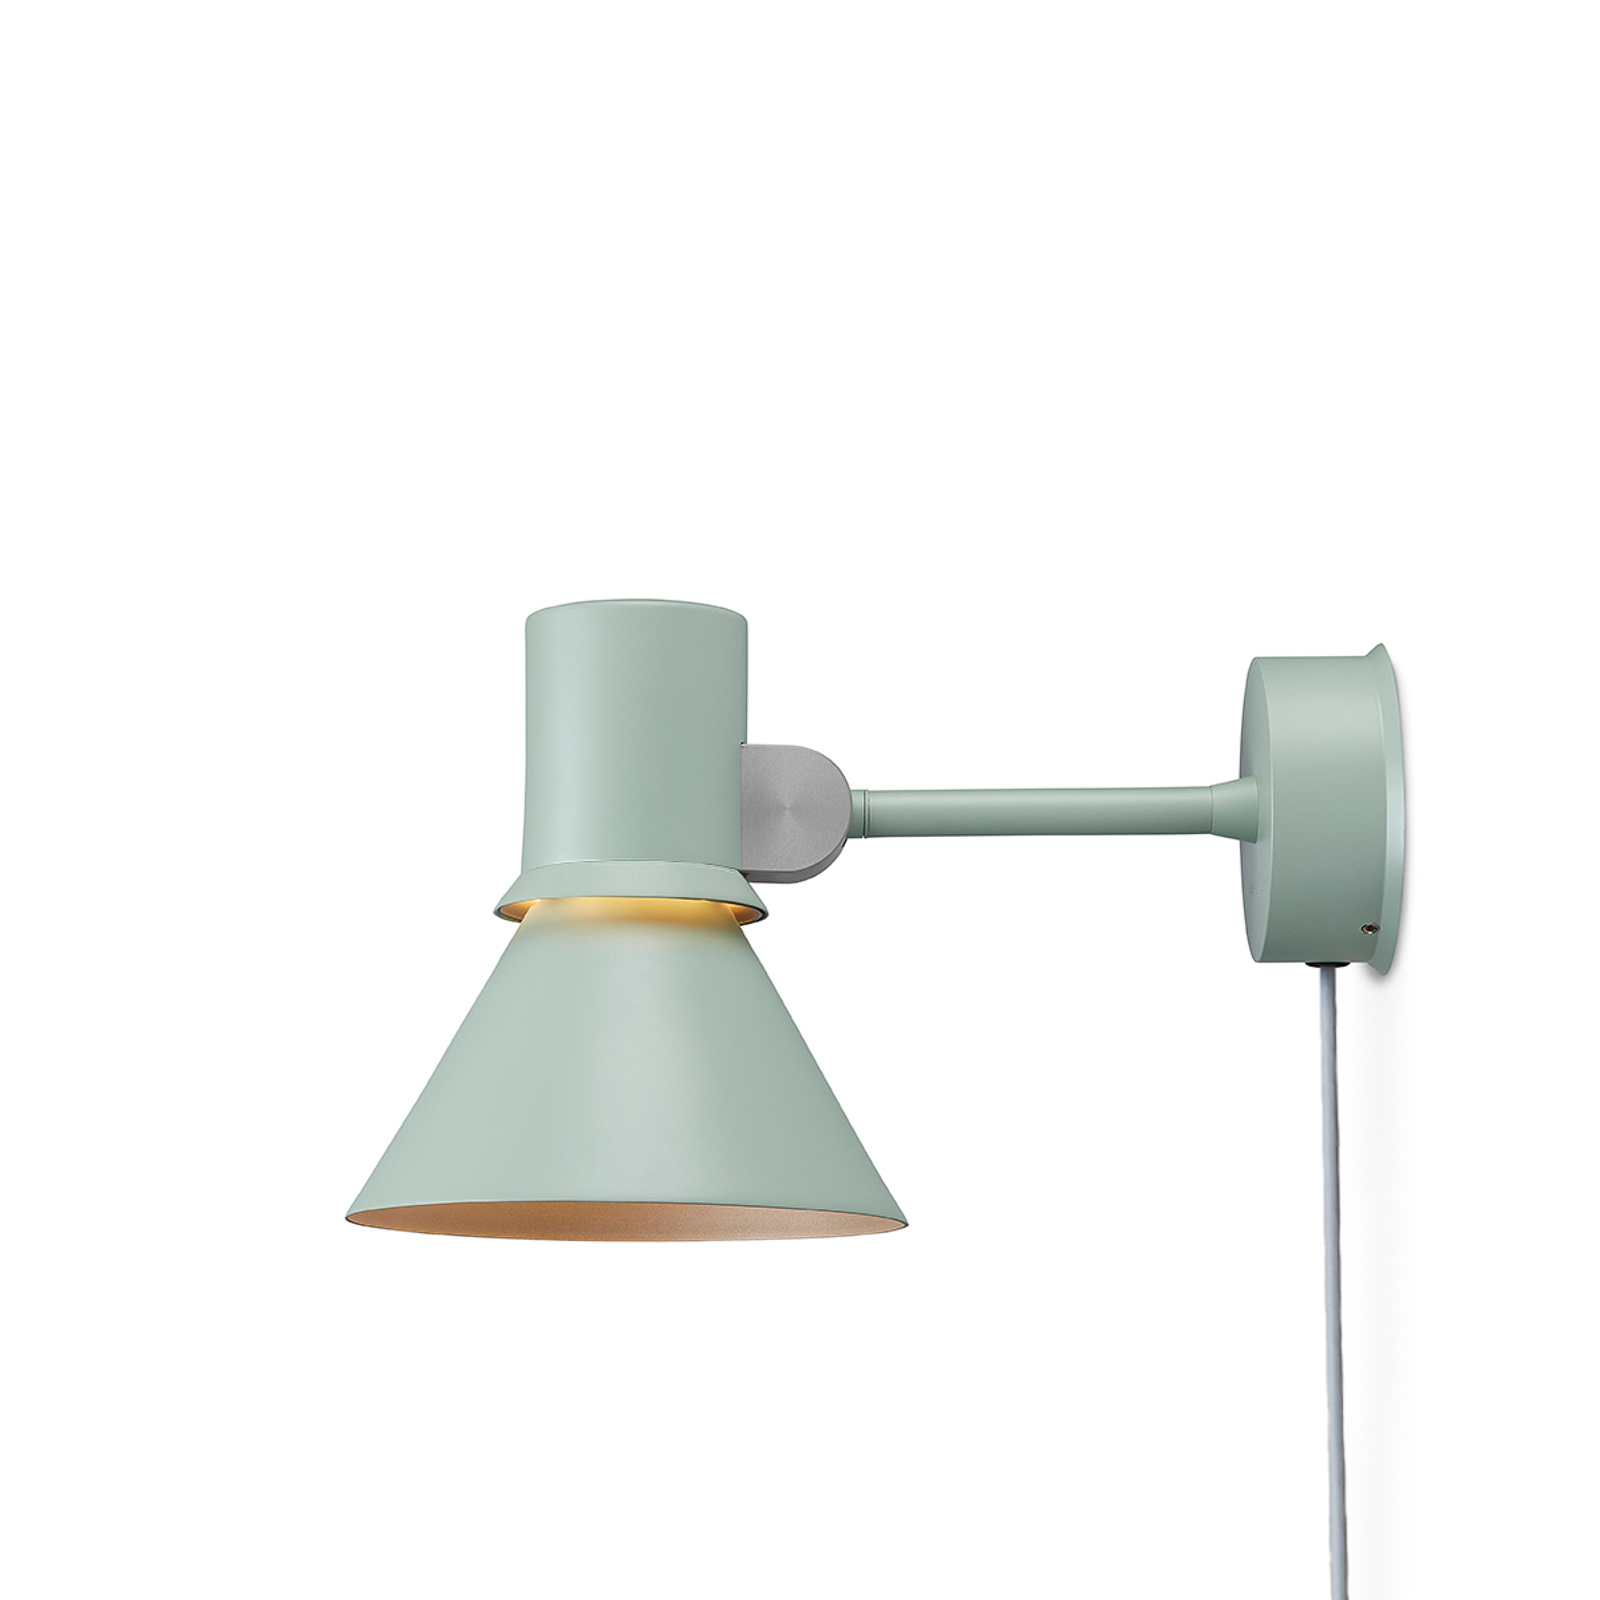 Anglepoise Type 80 W1 wall lamp with plug, green